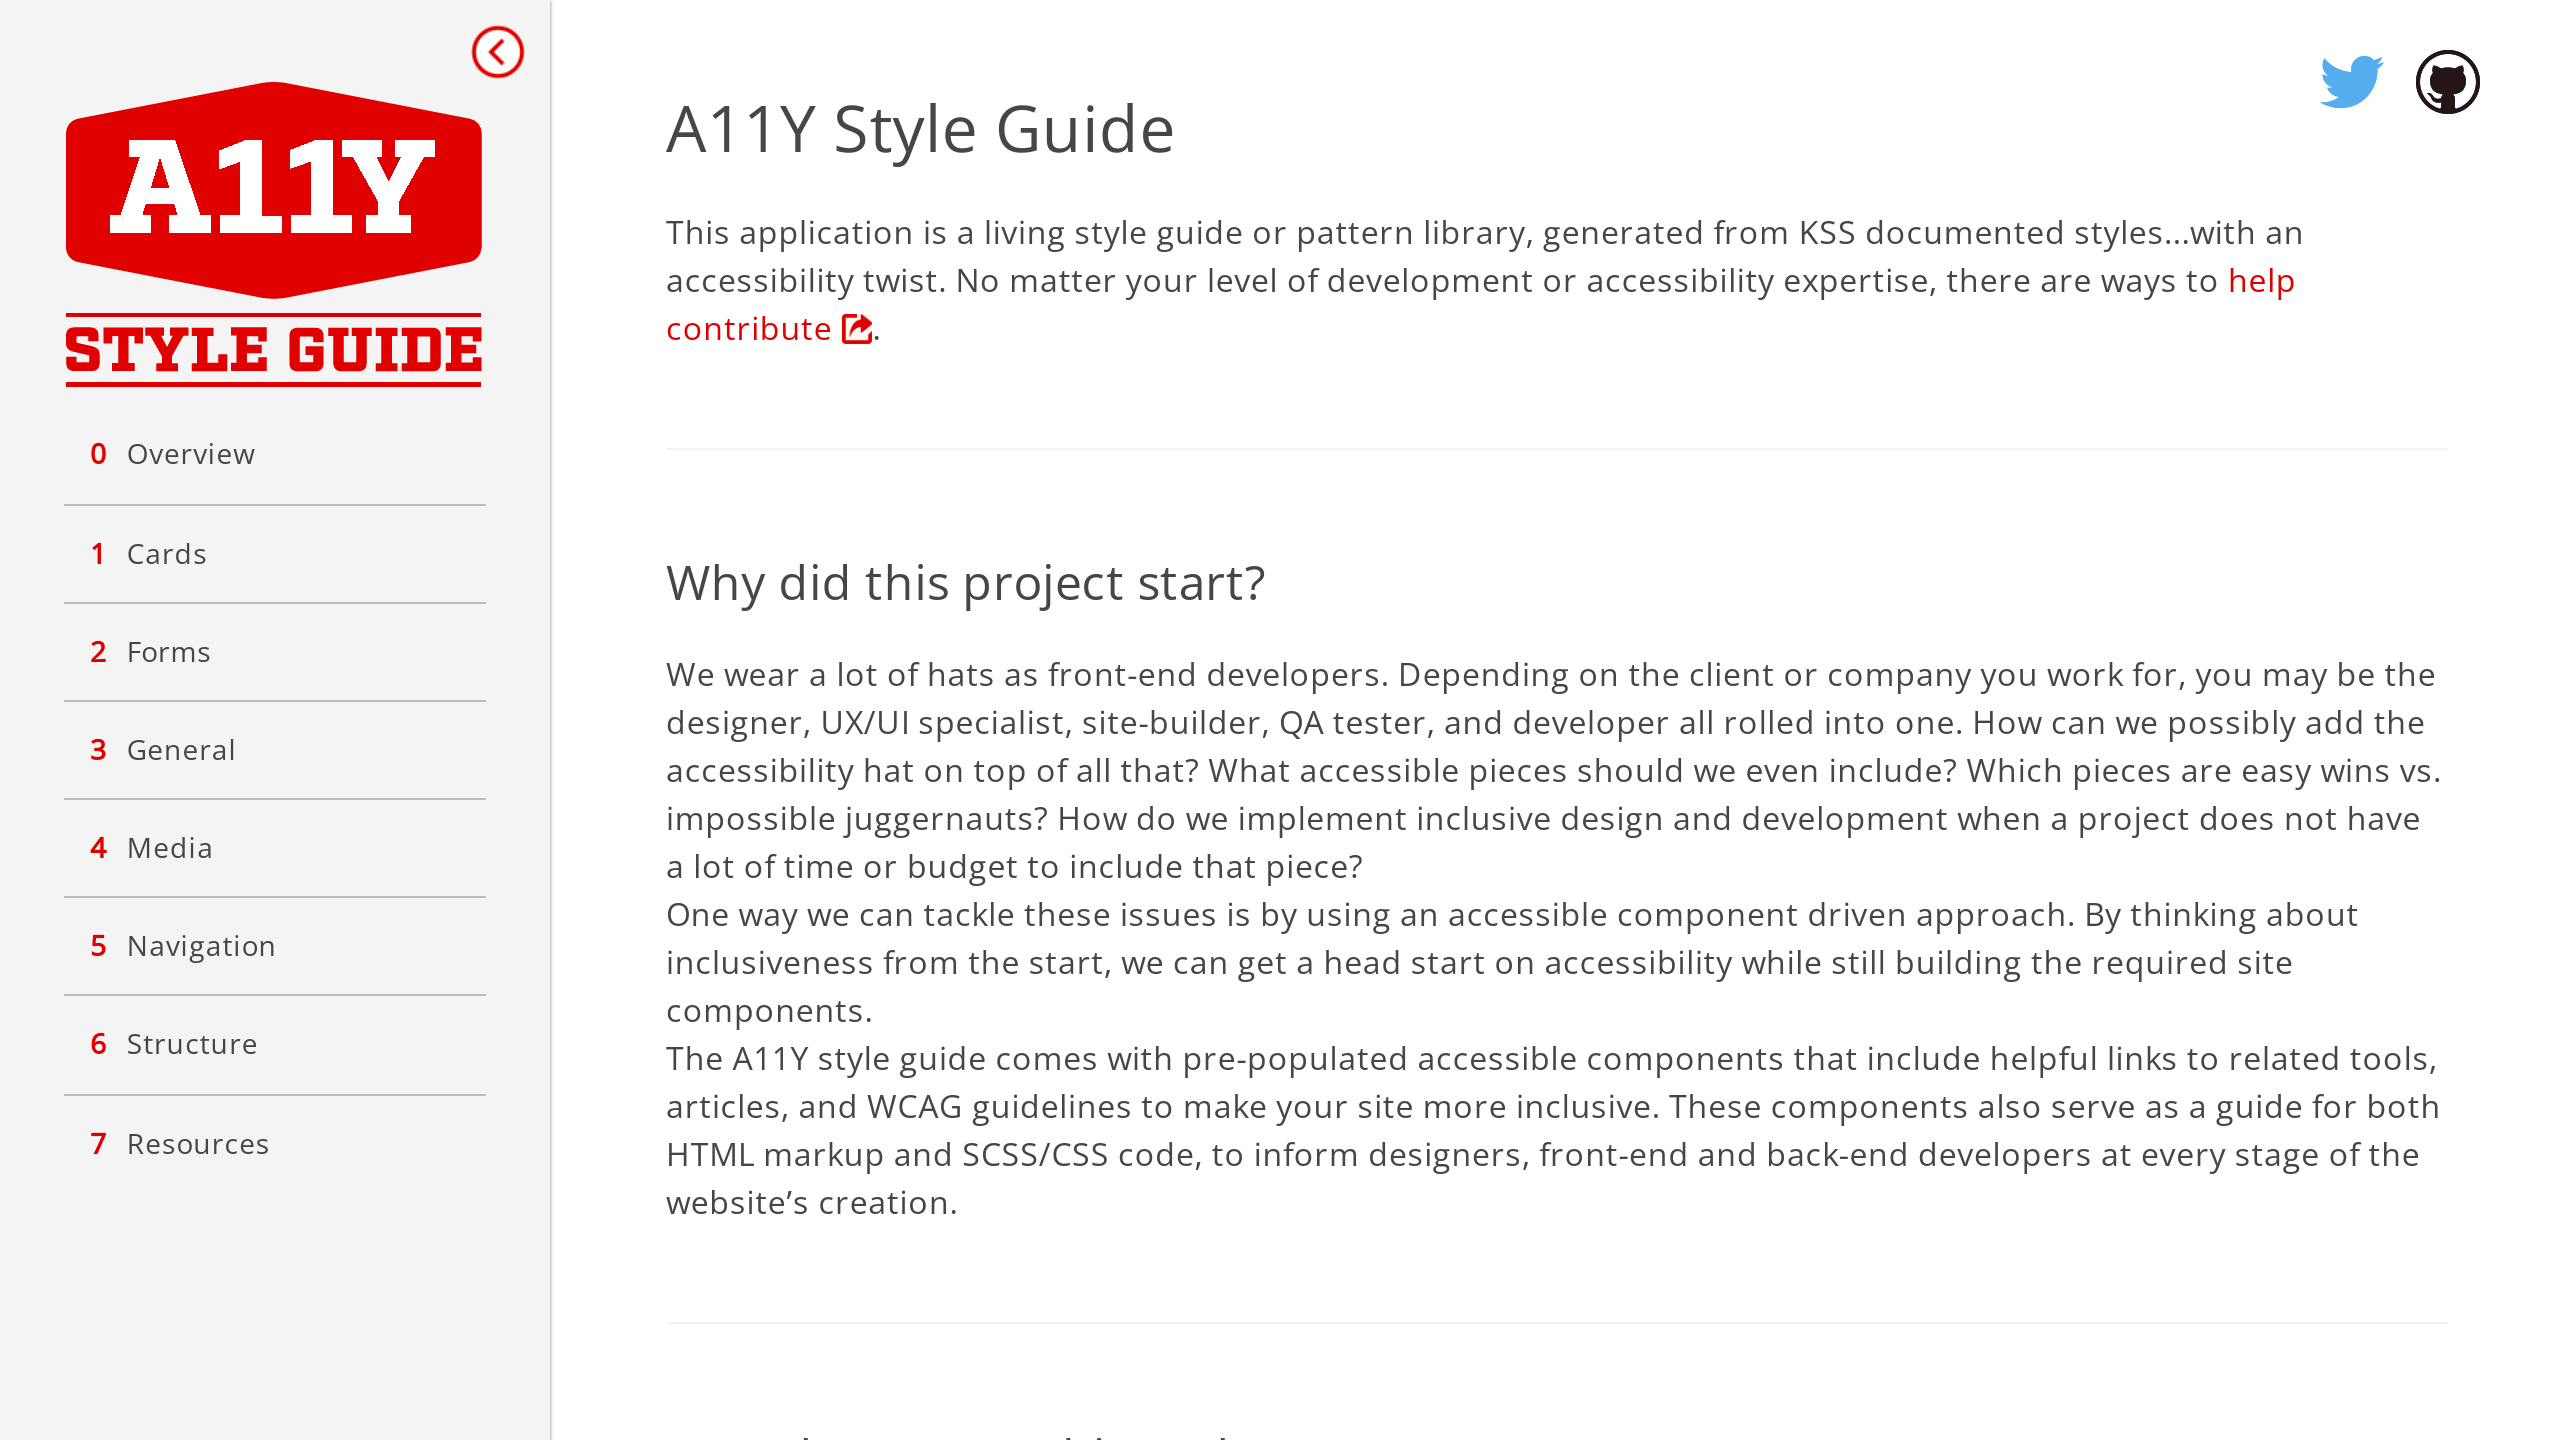 A11Y Style Guide's website screenshot